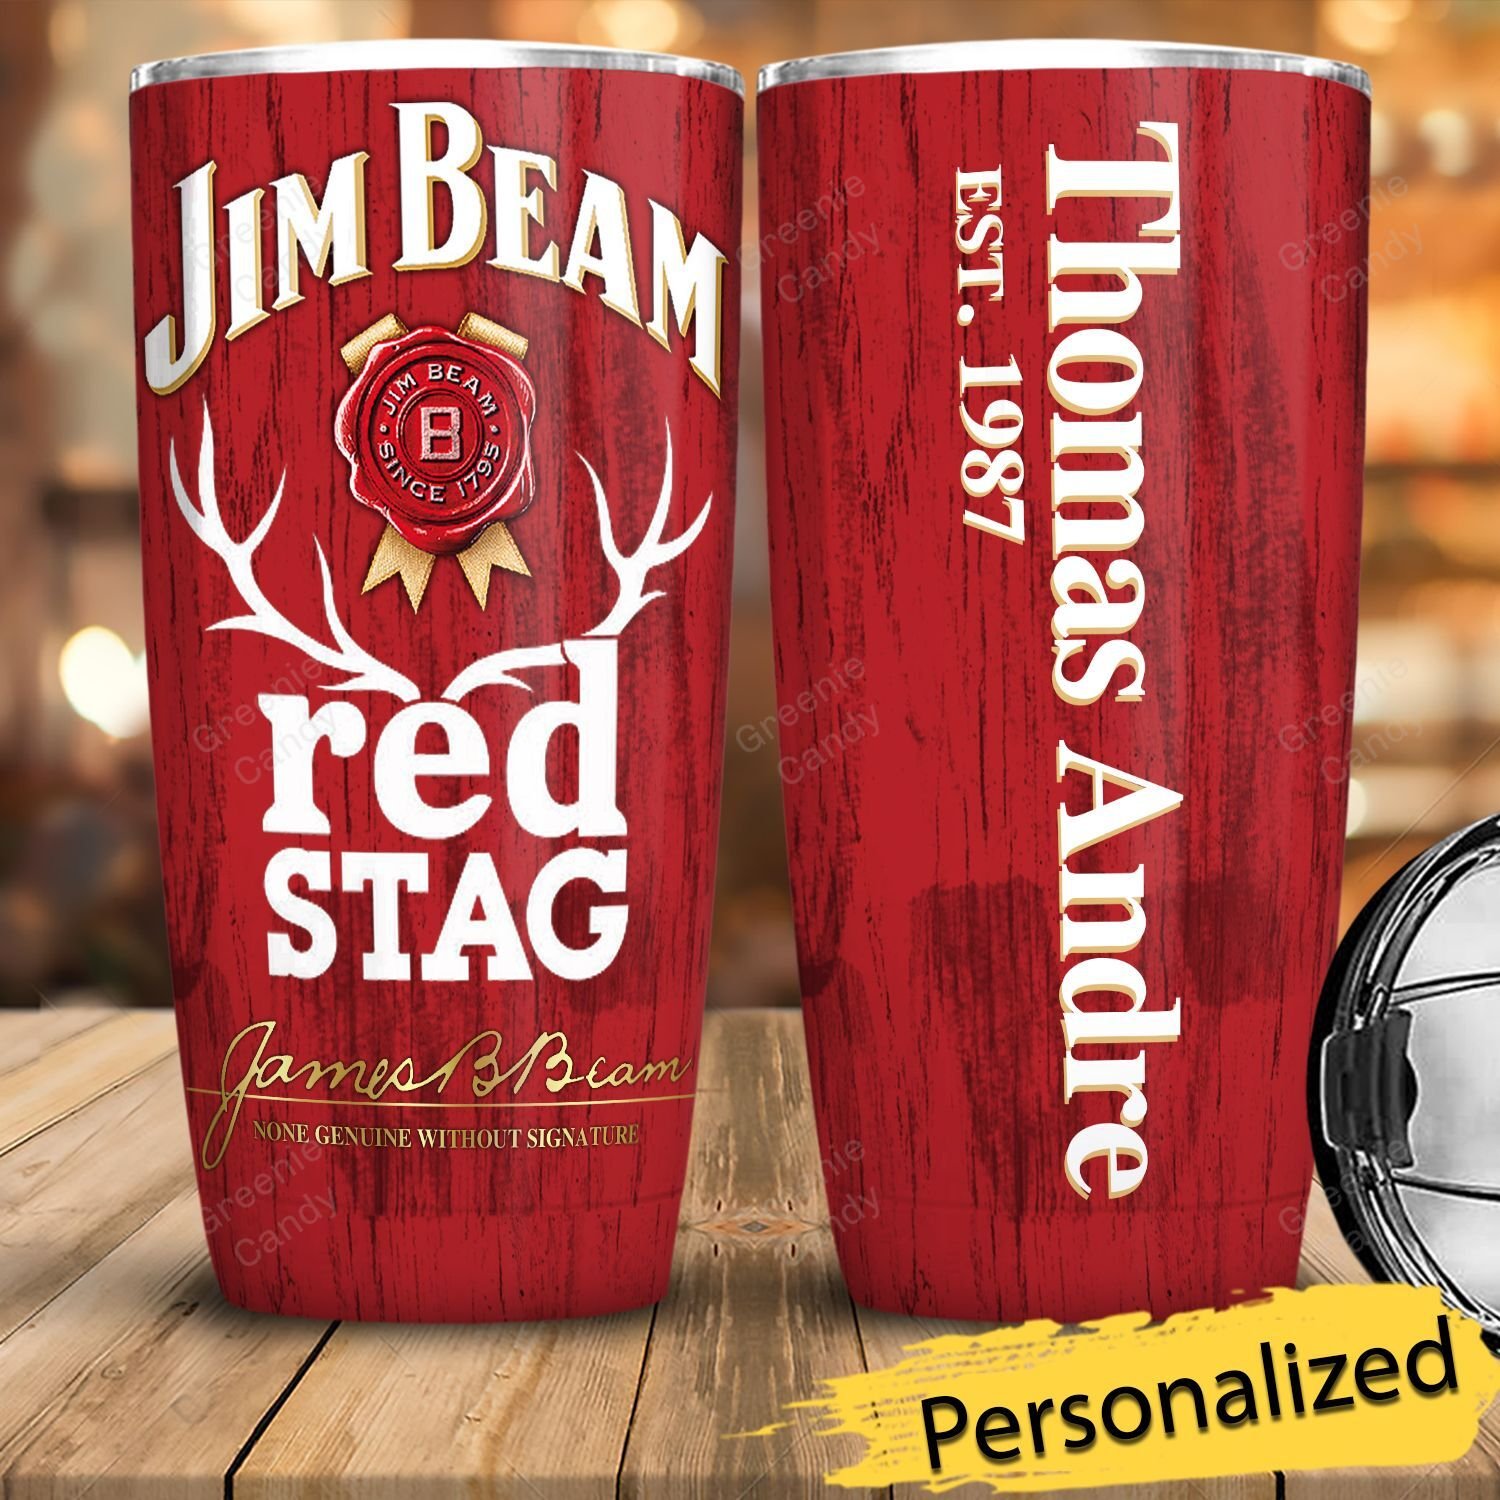 Personalized_Jim_Beam_Red_Stag_Whiskey_Tumbler